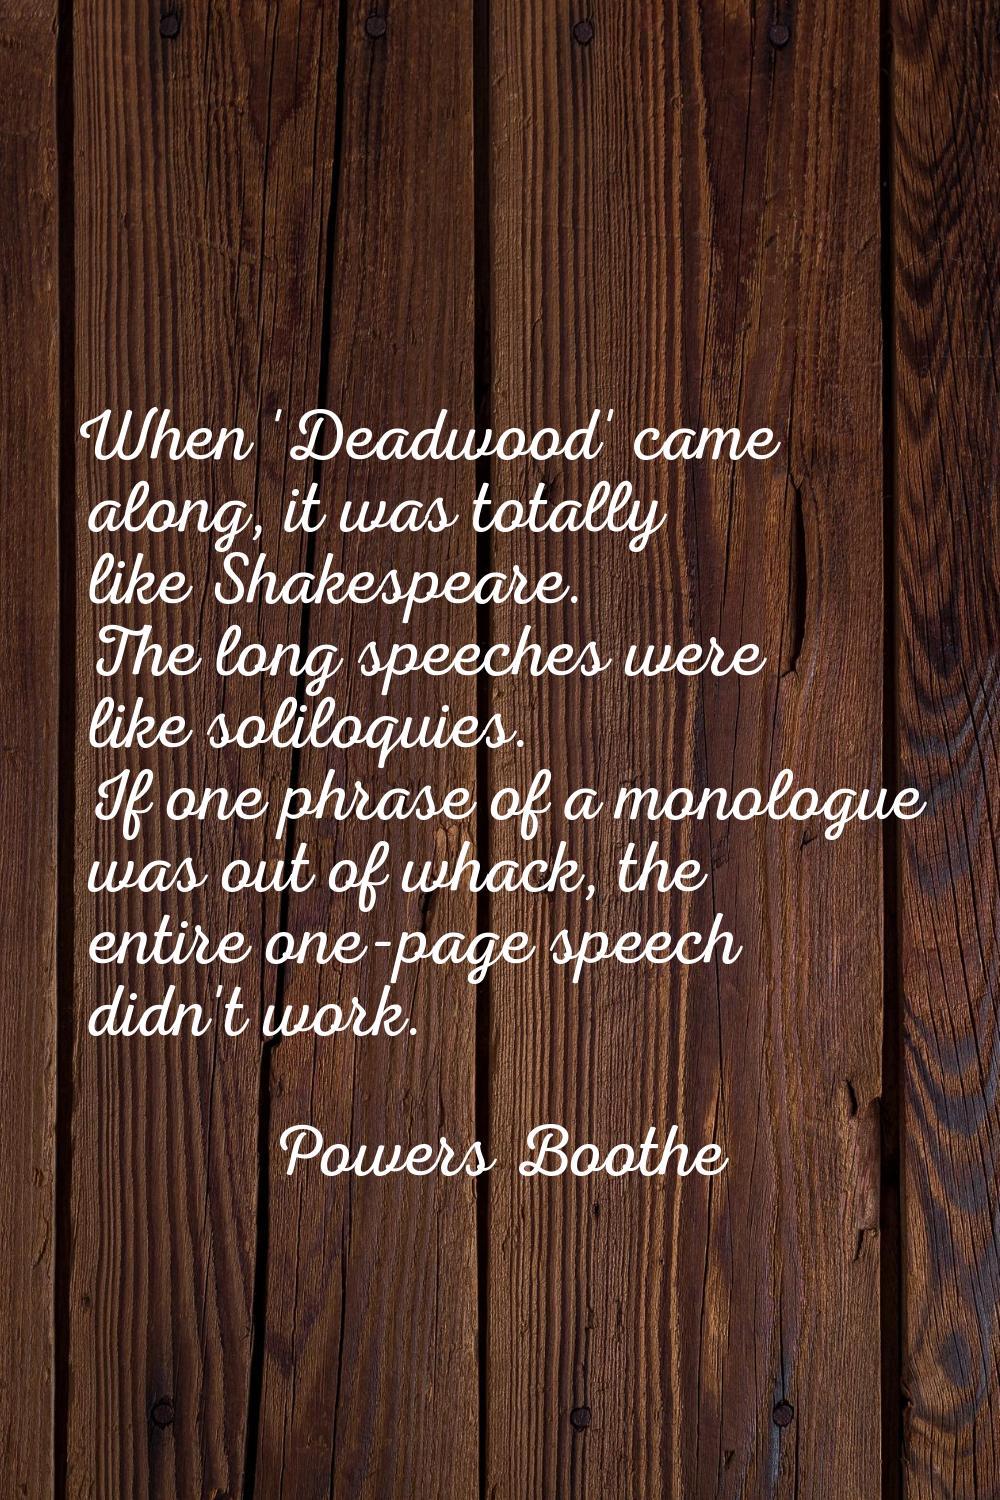 When 'Deadwood' came along, it was totally like Shakespeare. The long speeches were like soliloquie